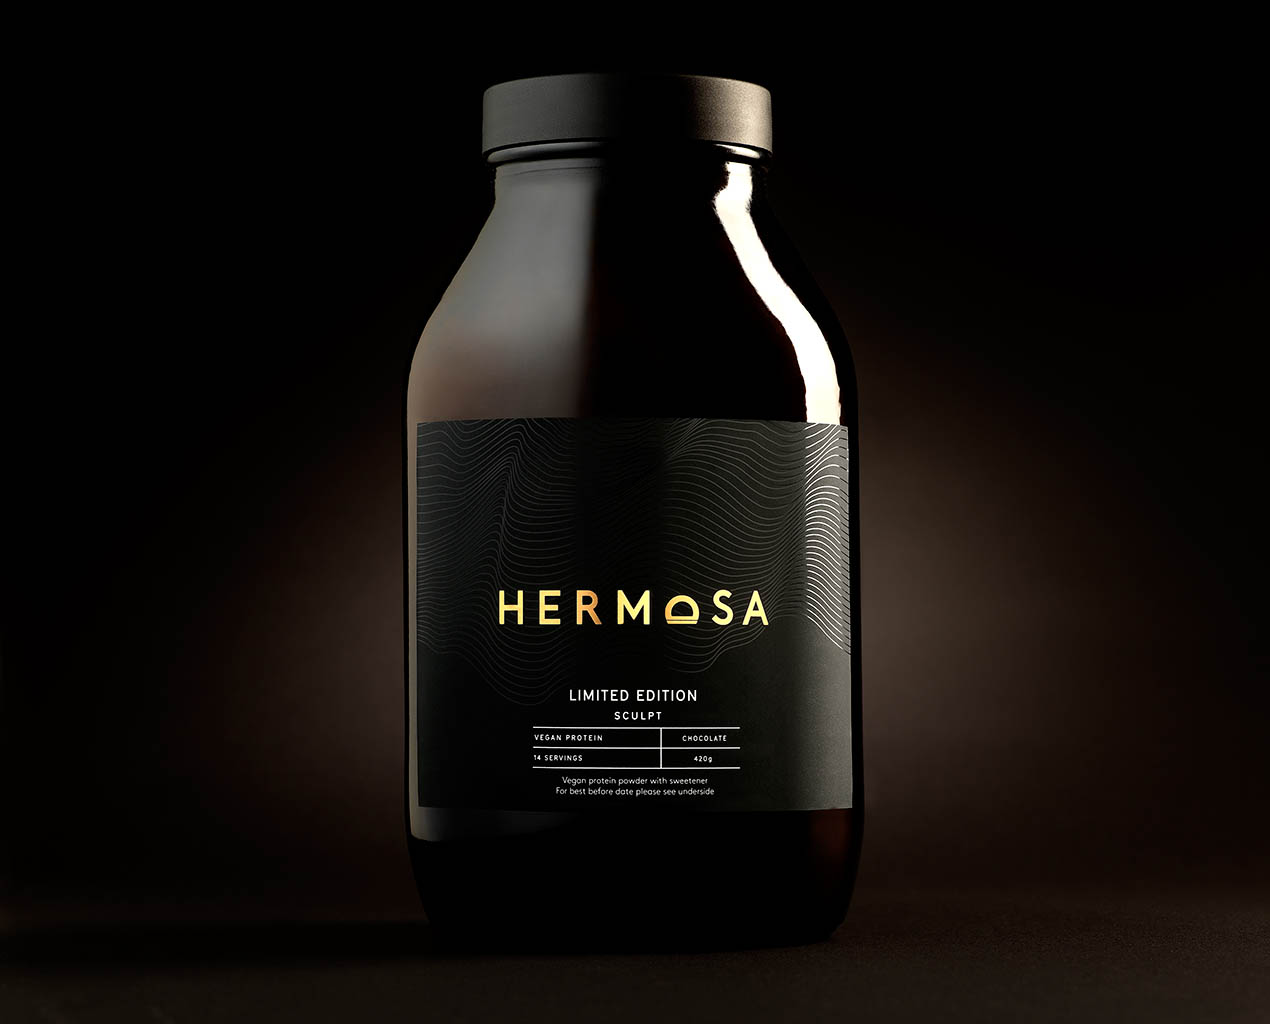 Drinks Photography of Hermosa vegan protein powder by Packshot Factory